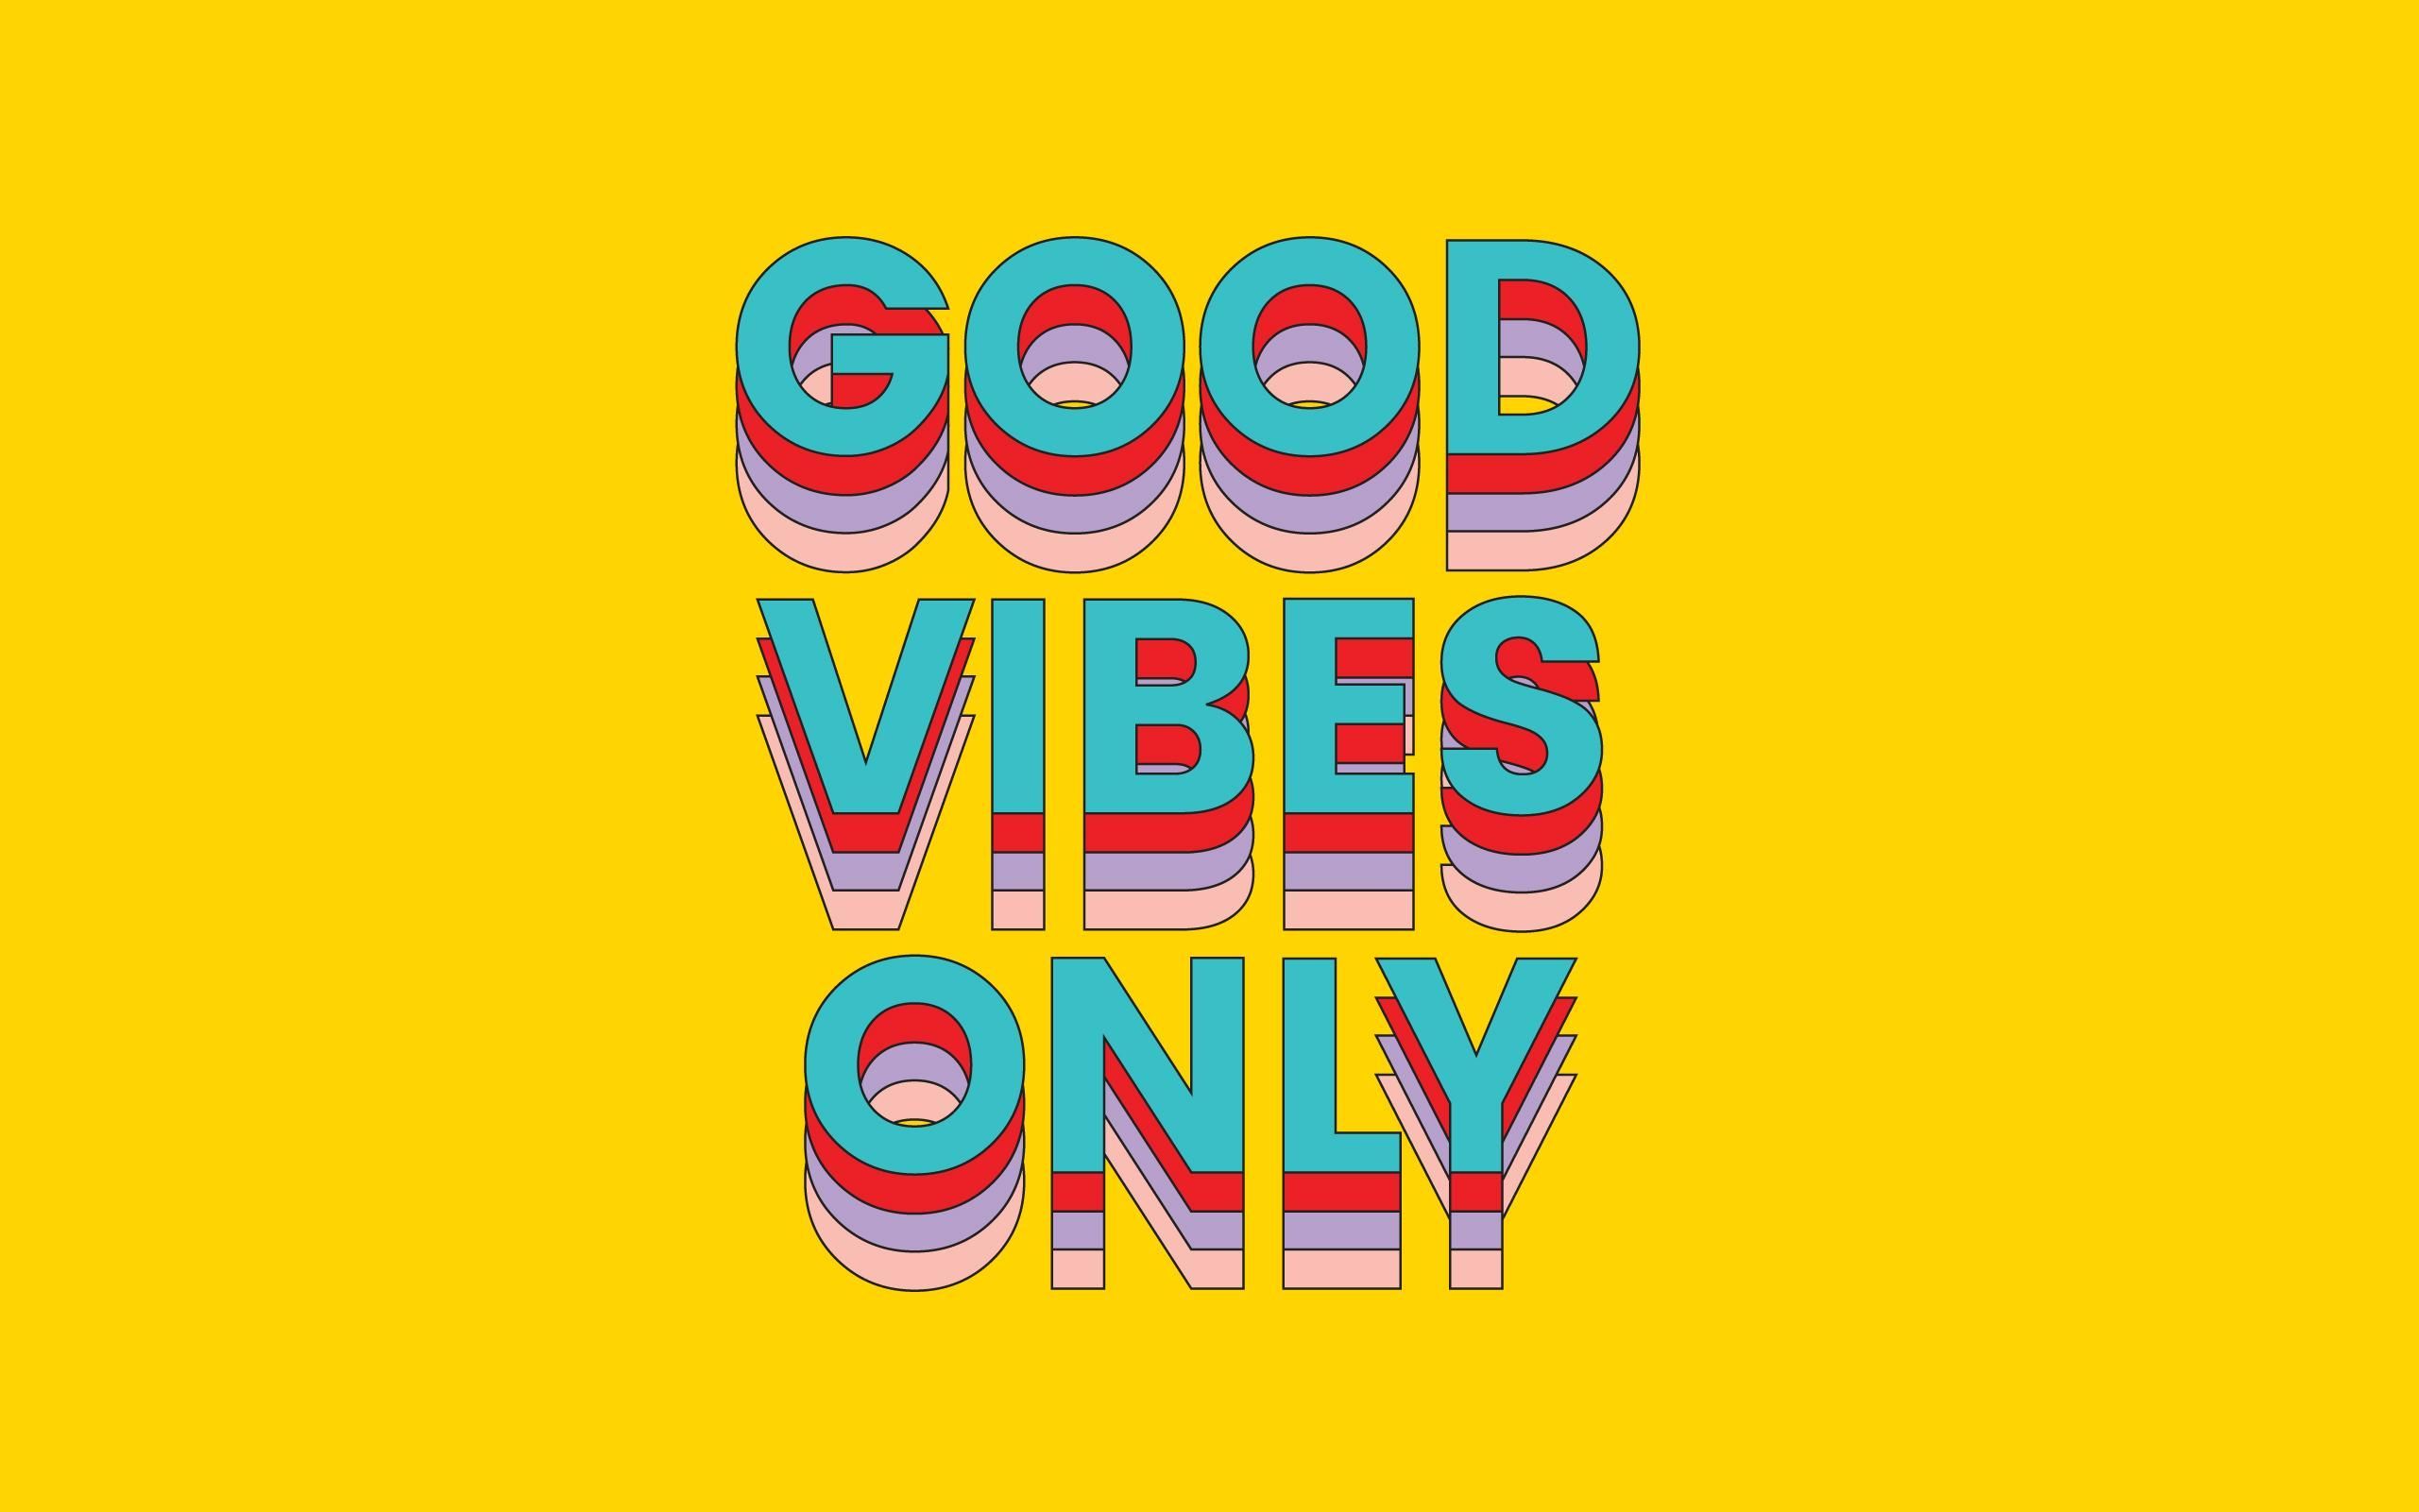 Good vibes only poster - 